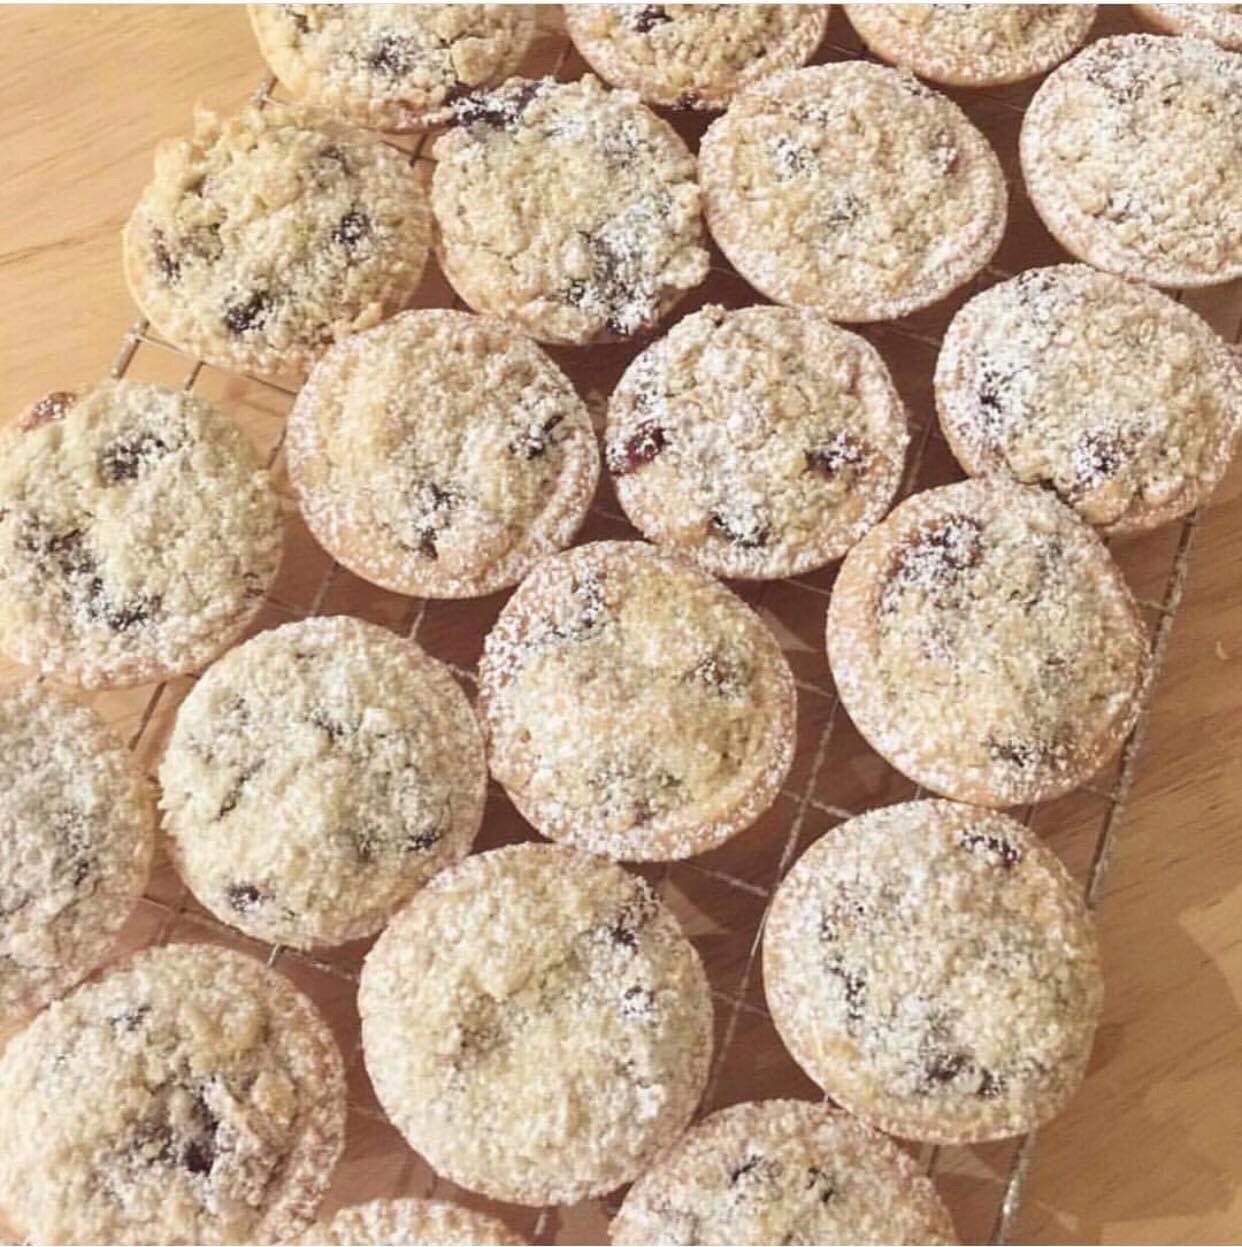 Recipe for Crumble Mince Pies